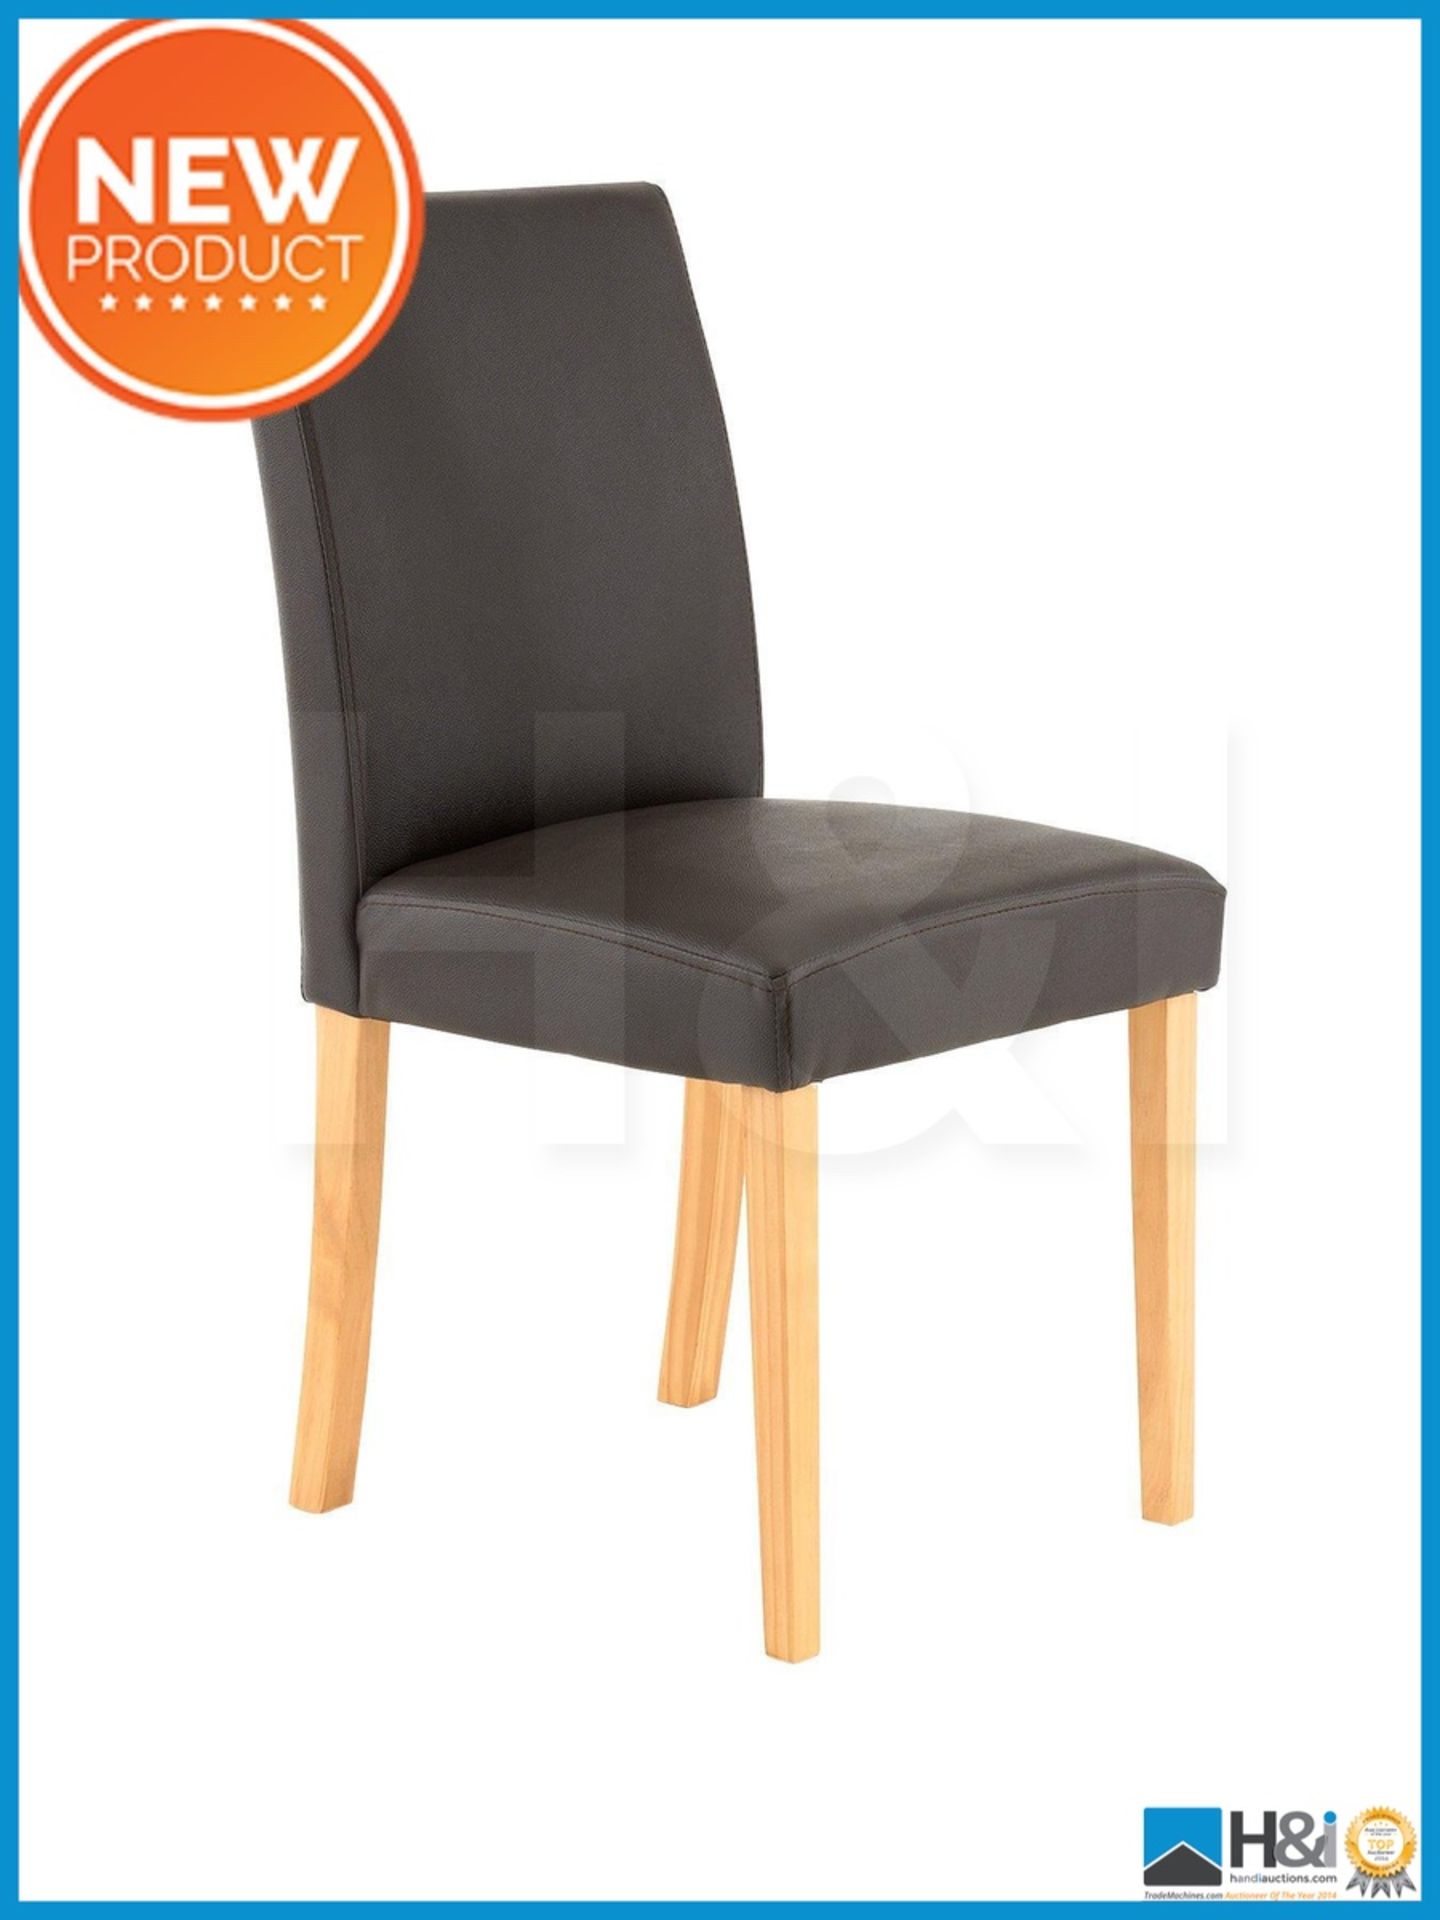 NEW IN BOX PRIMO SET OF 4 DINING CHAIRS [BROWN/OAK] 90 x 43 x 53cm RRP £259 Appraisal: Viewing